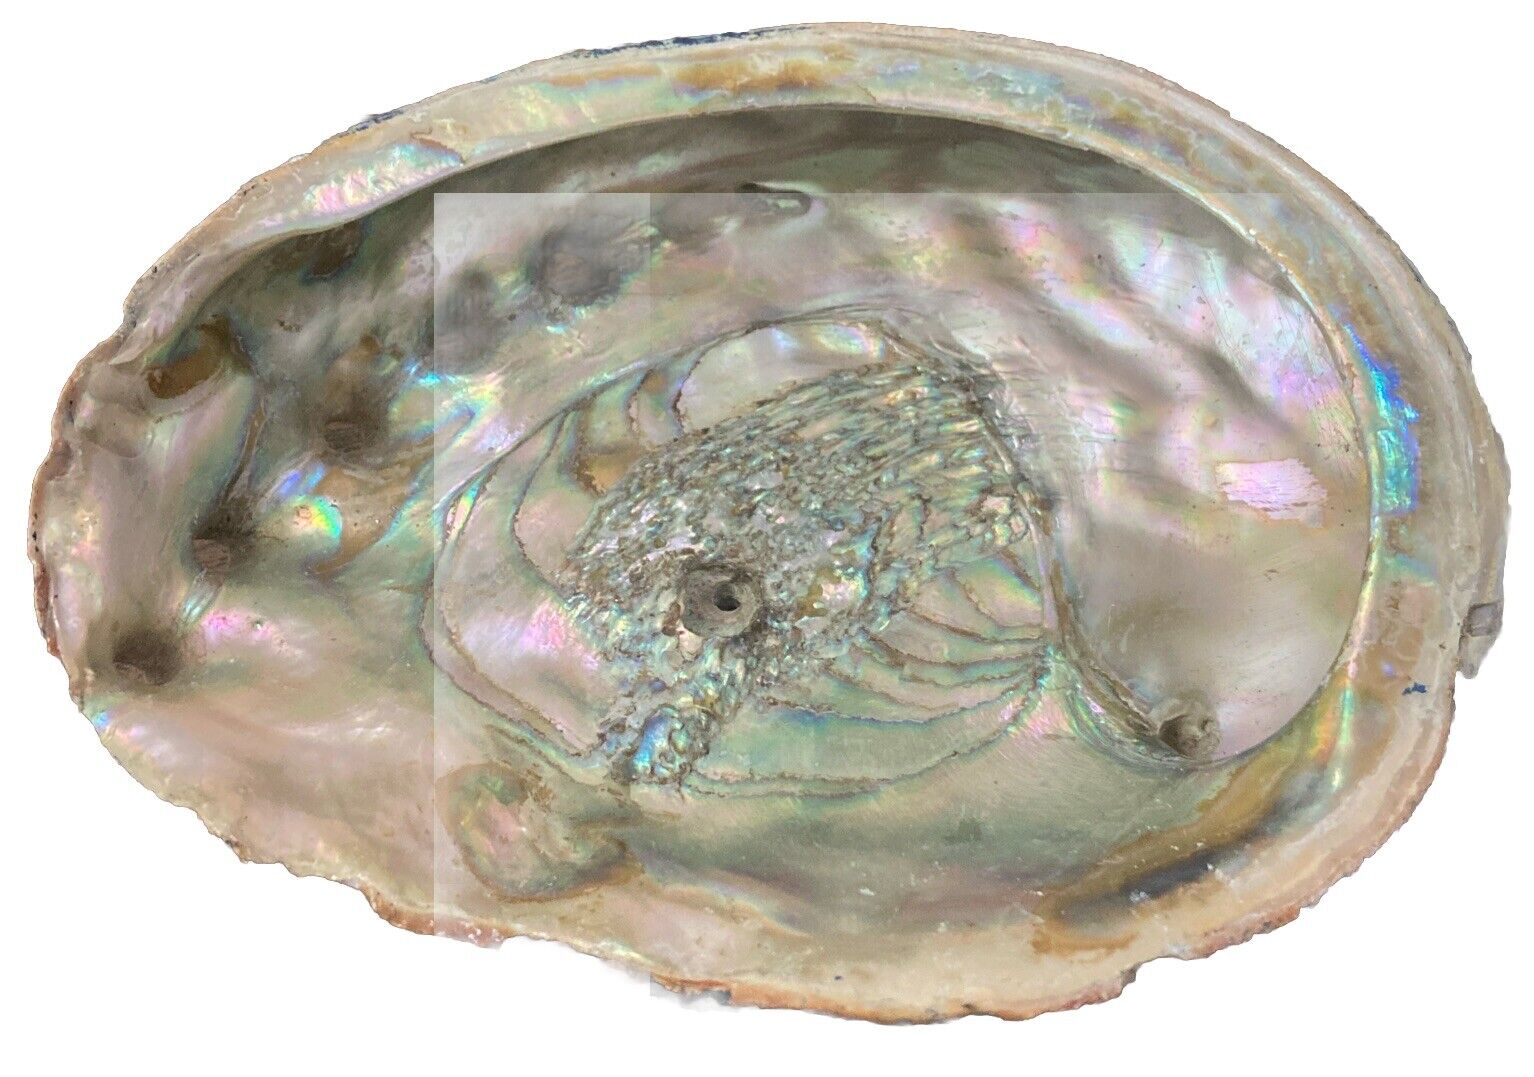 Large Vintage RED Abalone Shell for Crafts Jewlery Art Beach Decor 7.5” X 6” #12